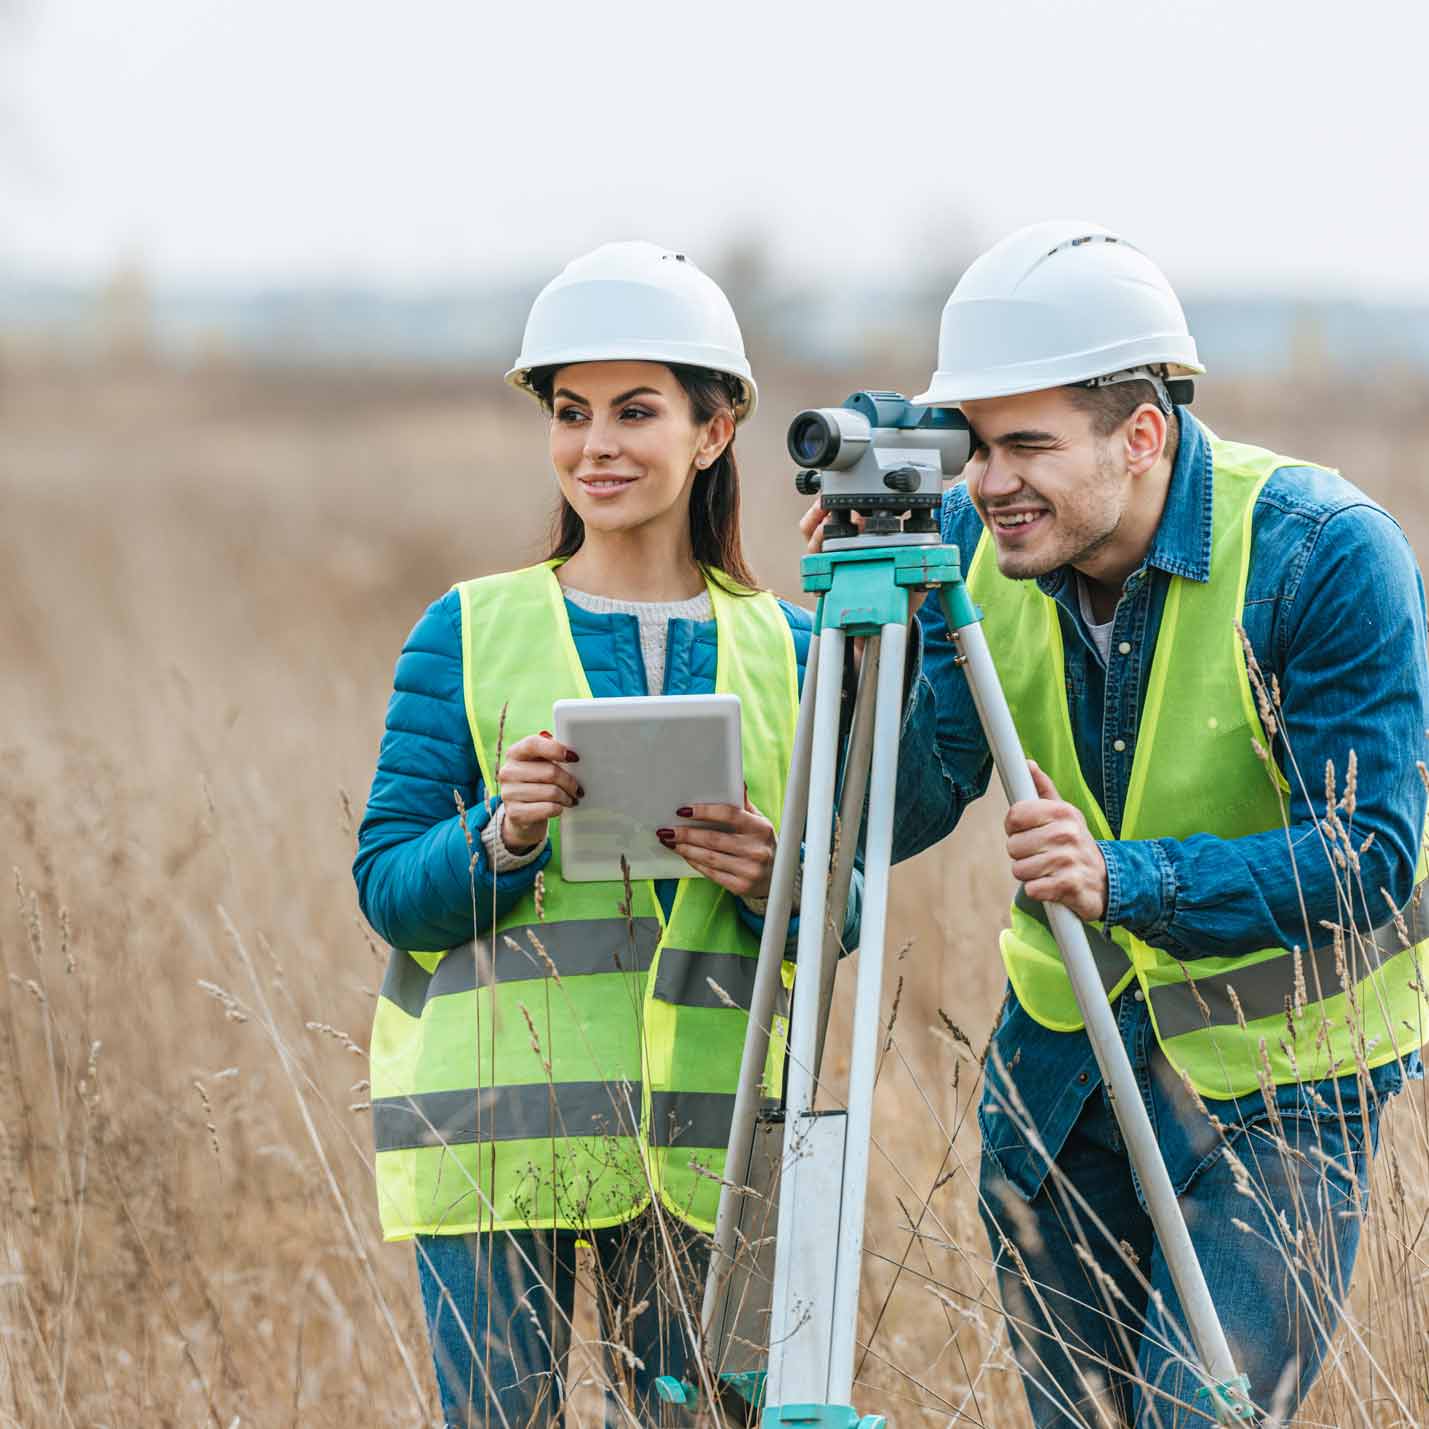 Two land surveyors out in the field